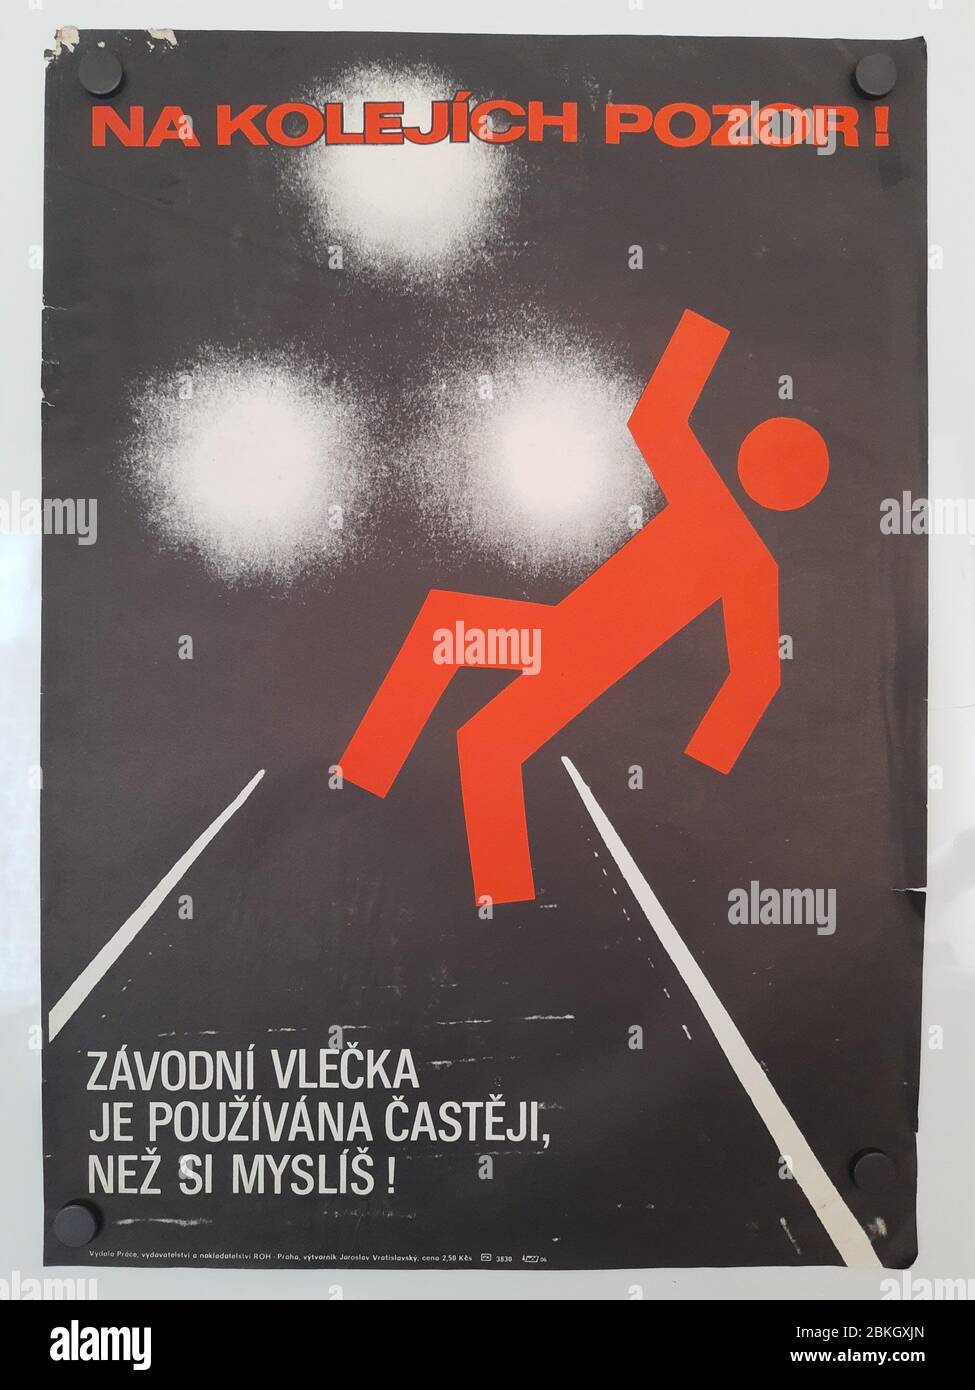 Careful on railtrack! Hit by train. Soviet union (Czech) work safety posters from 70´s. Stock Photo